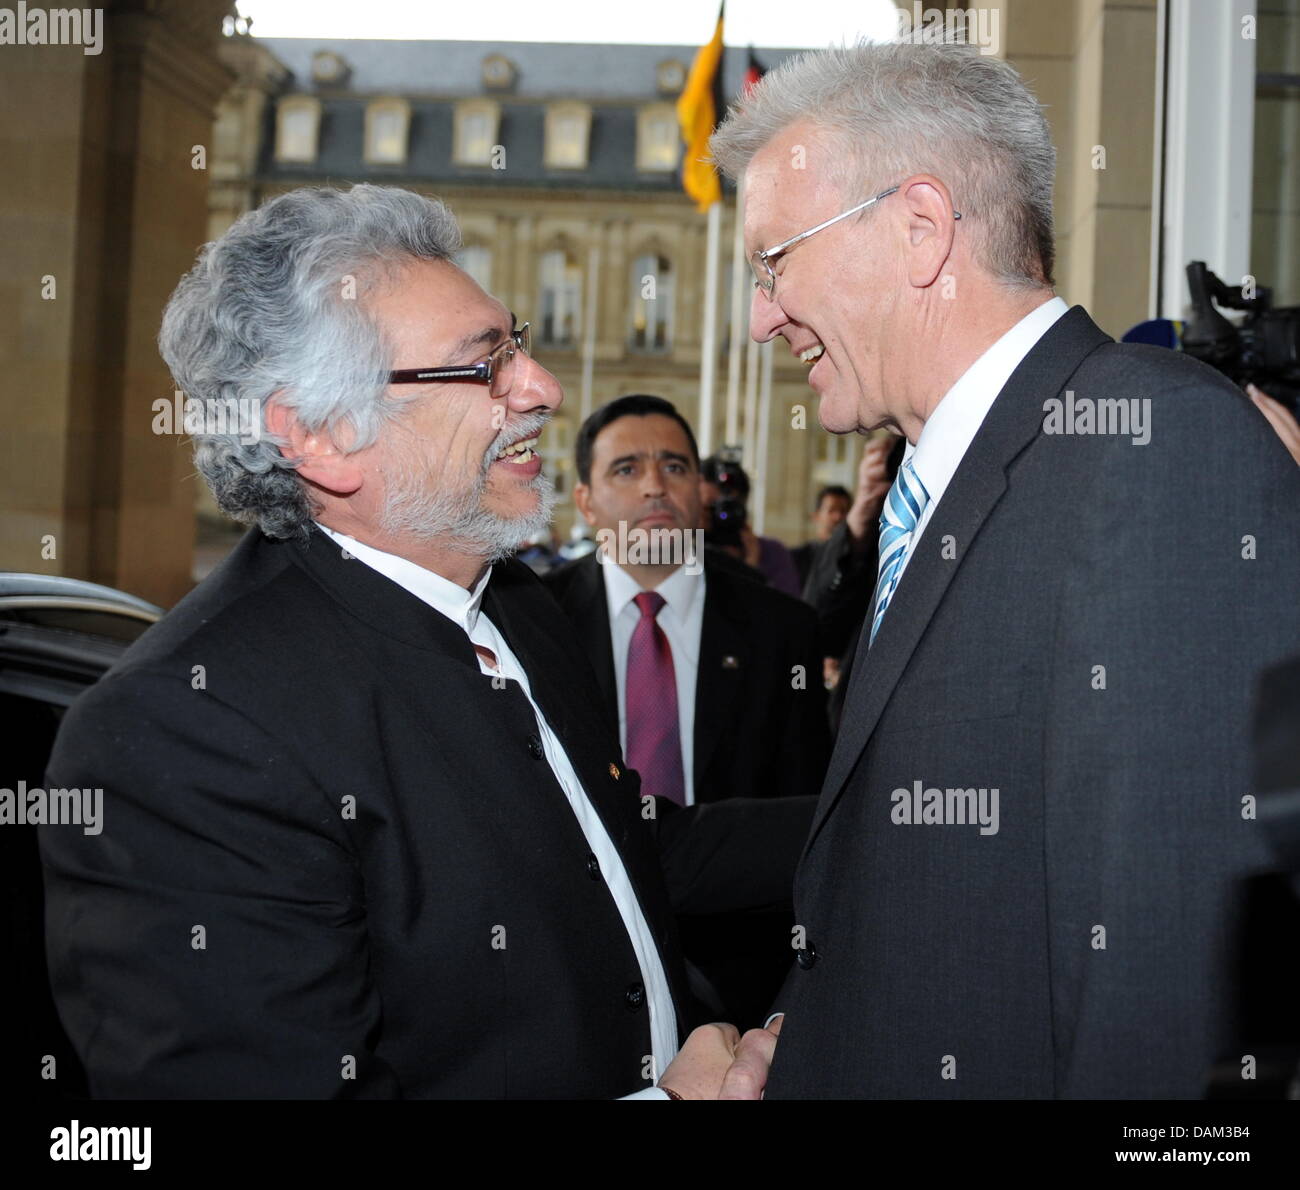 Winfried Kretschmann (R), Minister President of Baden-Wuerttemberg, welcomes the President of Paraguay, Fernando Armindo Lugo Mendez, at the Neue Schloss in Stuttgart, Germany, 19 May 2011. Fernando Armindo Lugo Mendez is in Baden-Wuerttemberg for an exchange of ideas and thoughts. Photo: Bernd Weissbrod Stock Photo